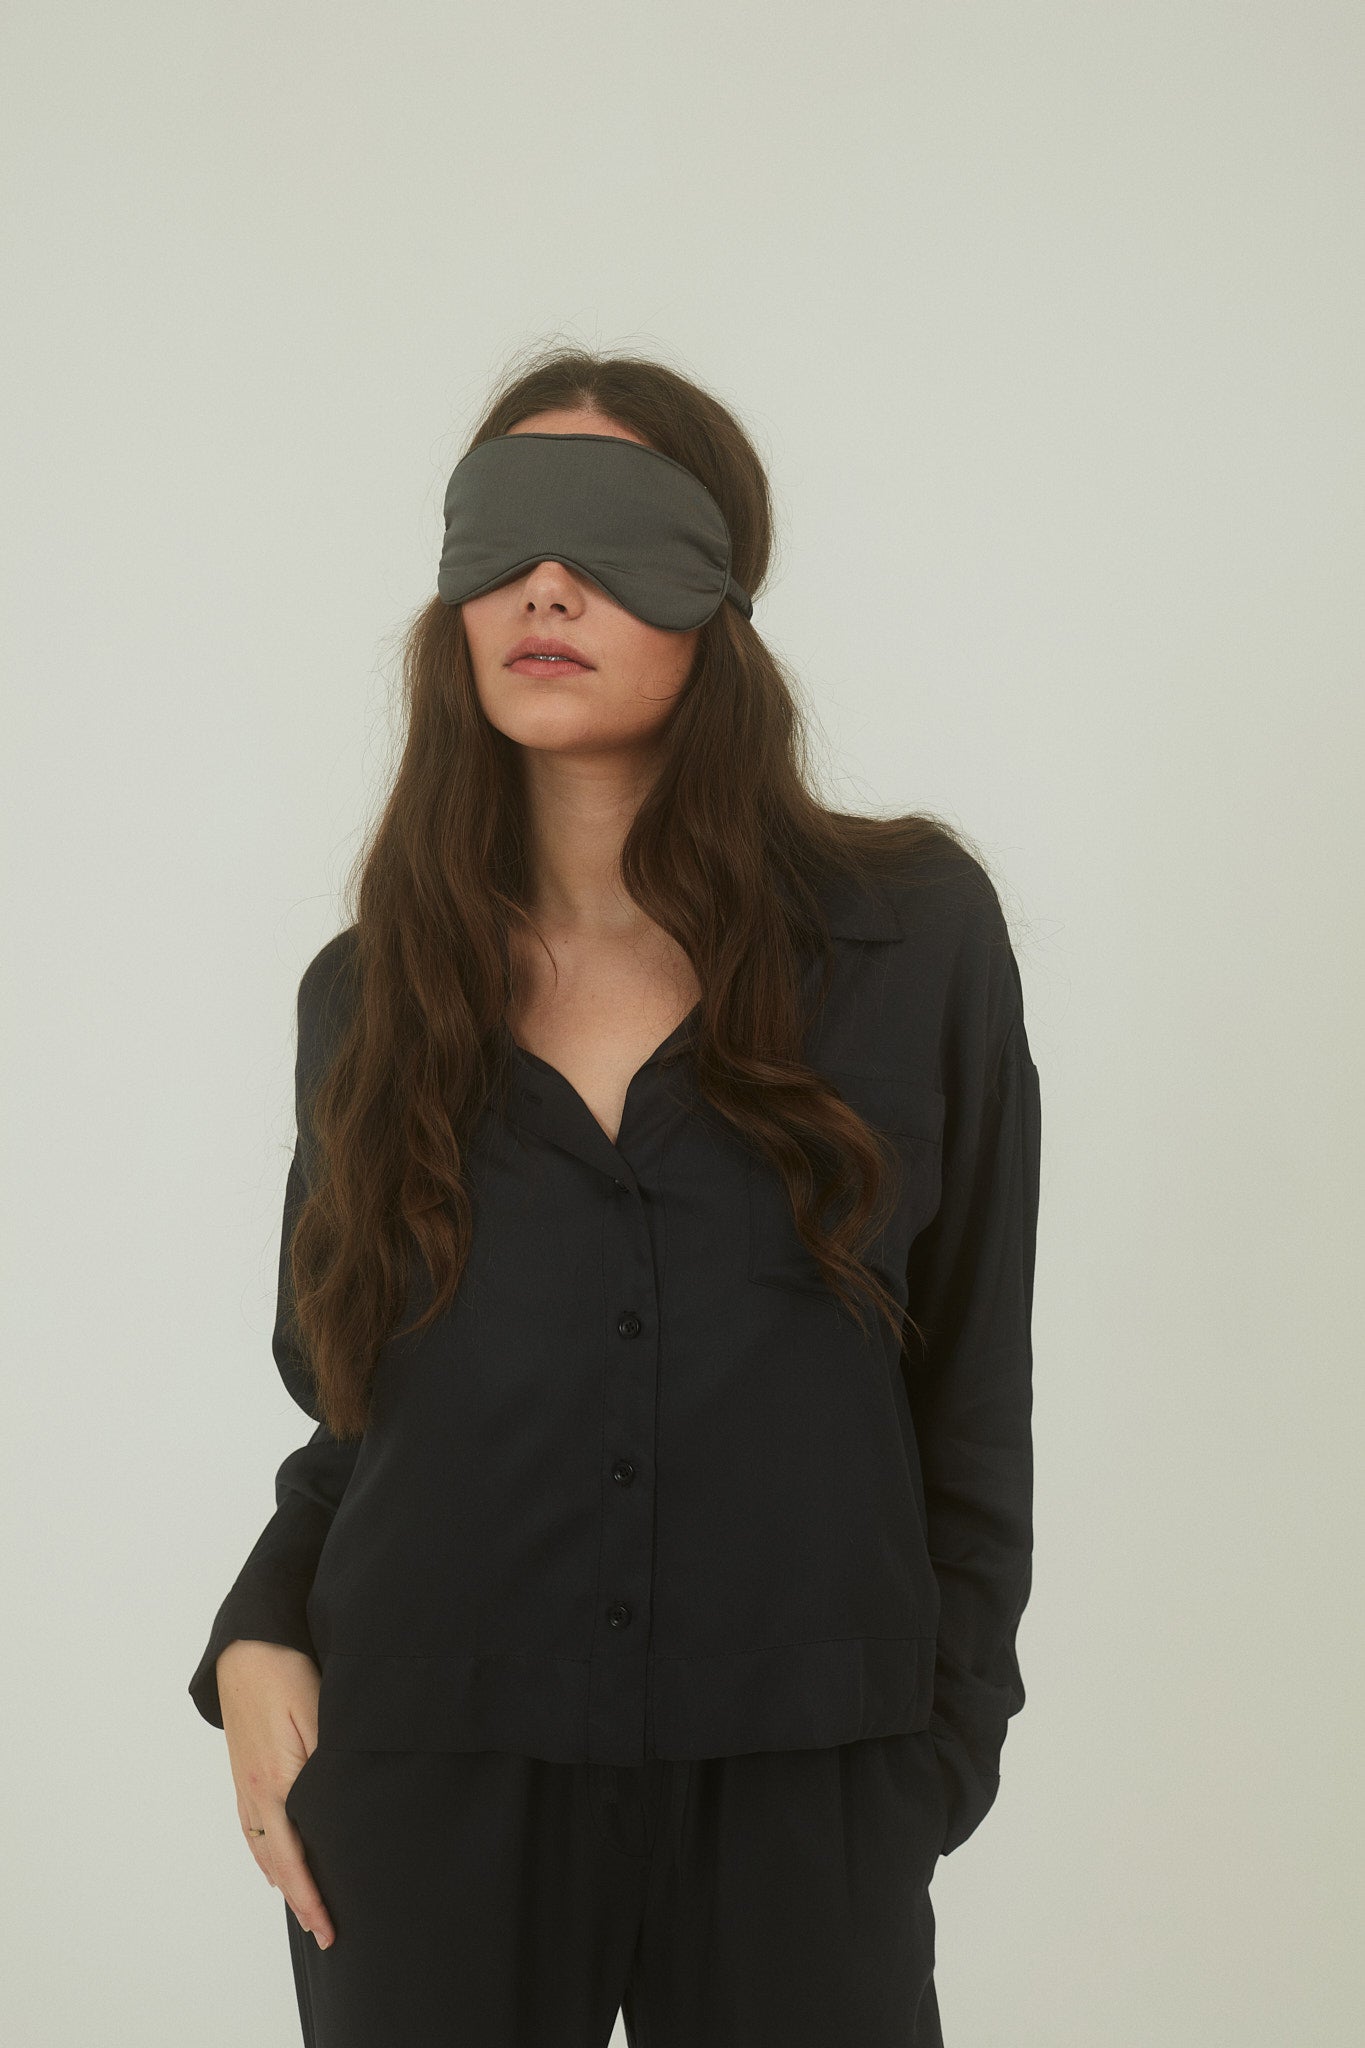 Bamboo Silk Sleep Mask - Charcoal PRE ORDER AVAILAVLE. Expected arrive into stock in 6-8 weeks.